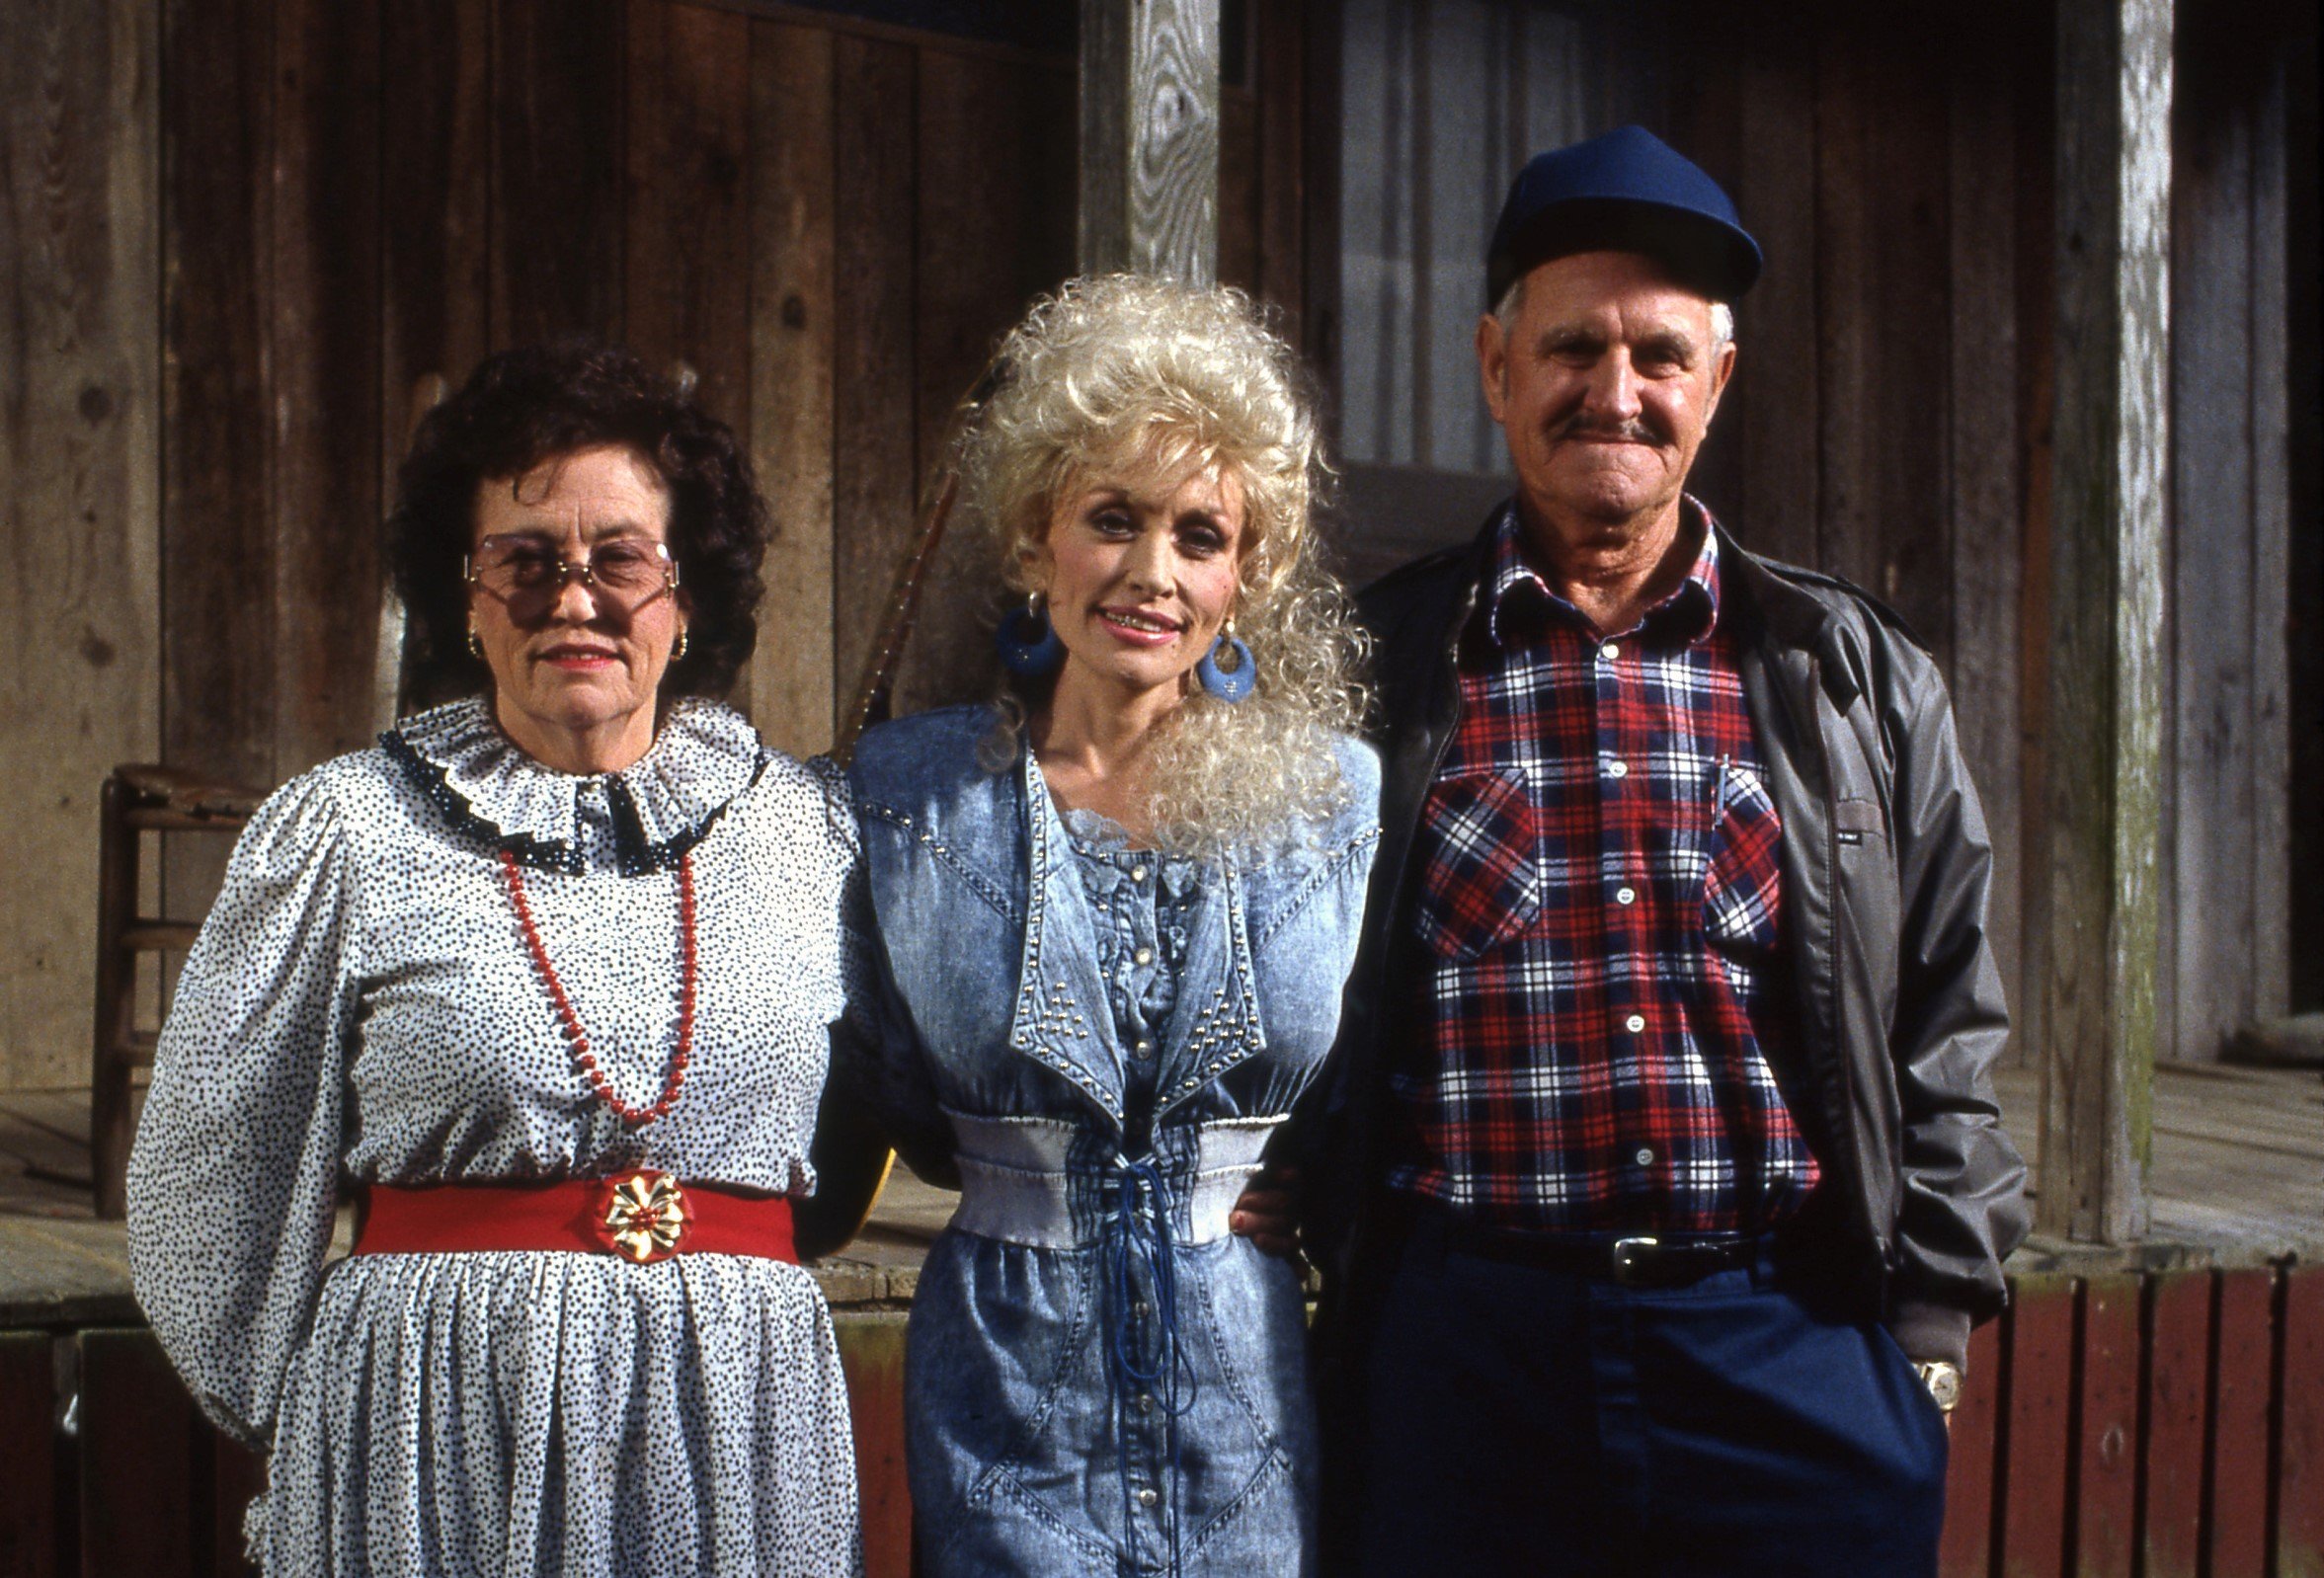 Dolly Parton's mother Avie Lee Owens wears a black and white dress with a red belt. Dolly Parton wears a blue dress. Dolly Parton's father Lee Parton wears a red plaid shirt and blue hat.